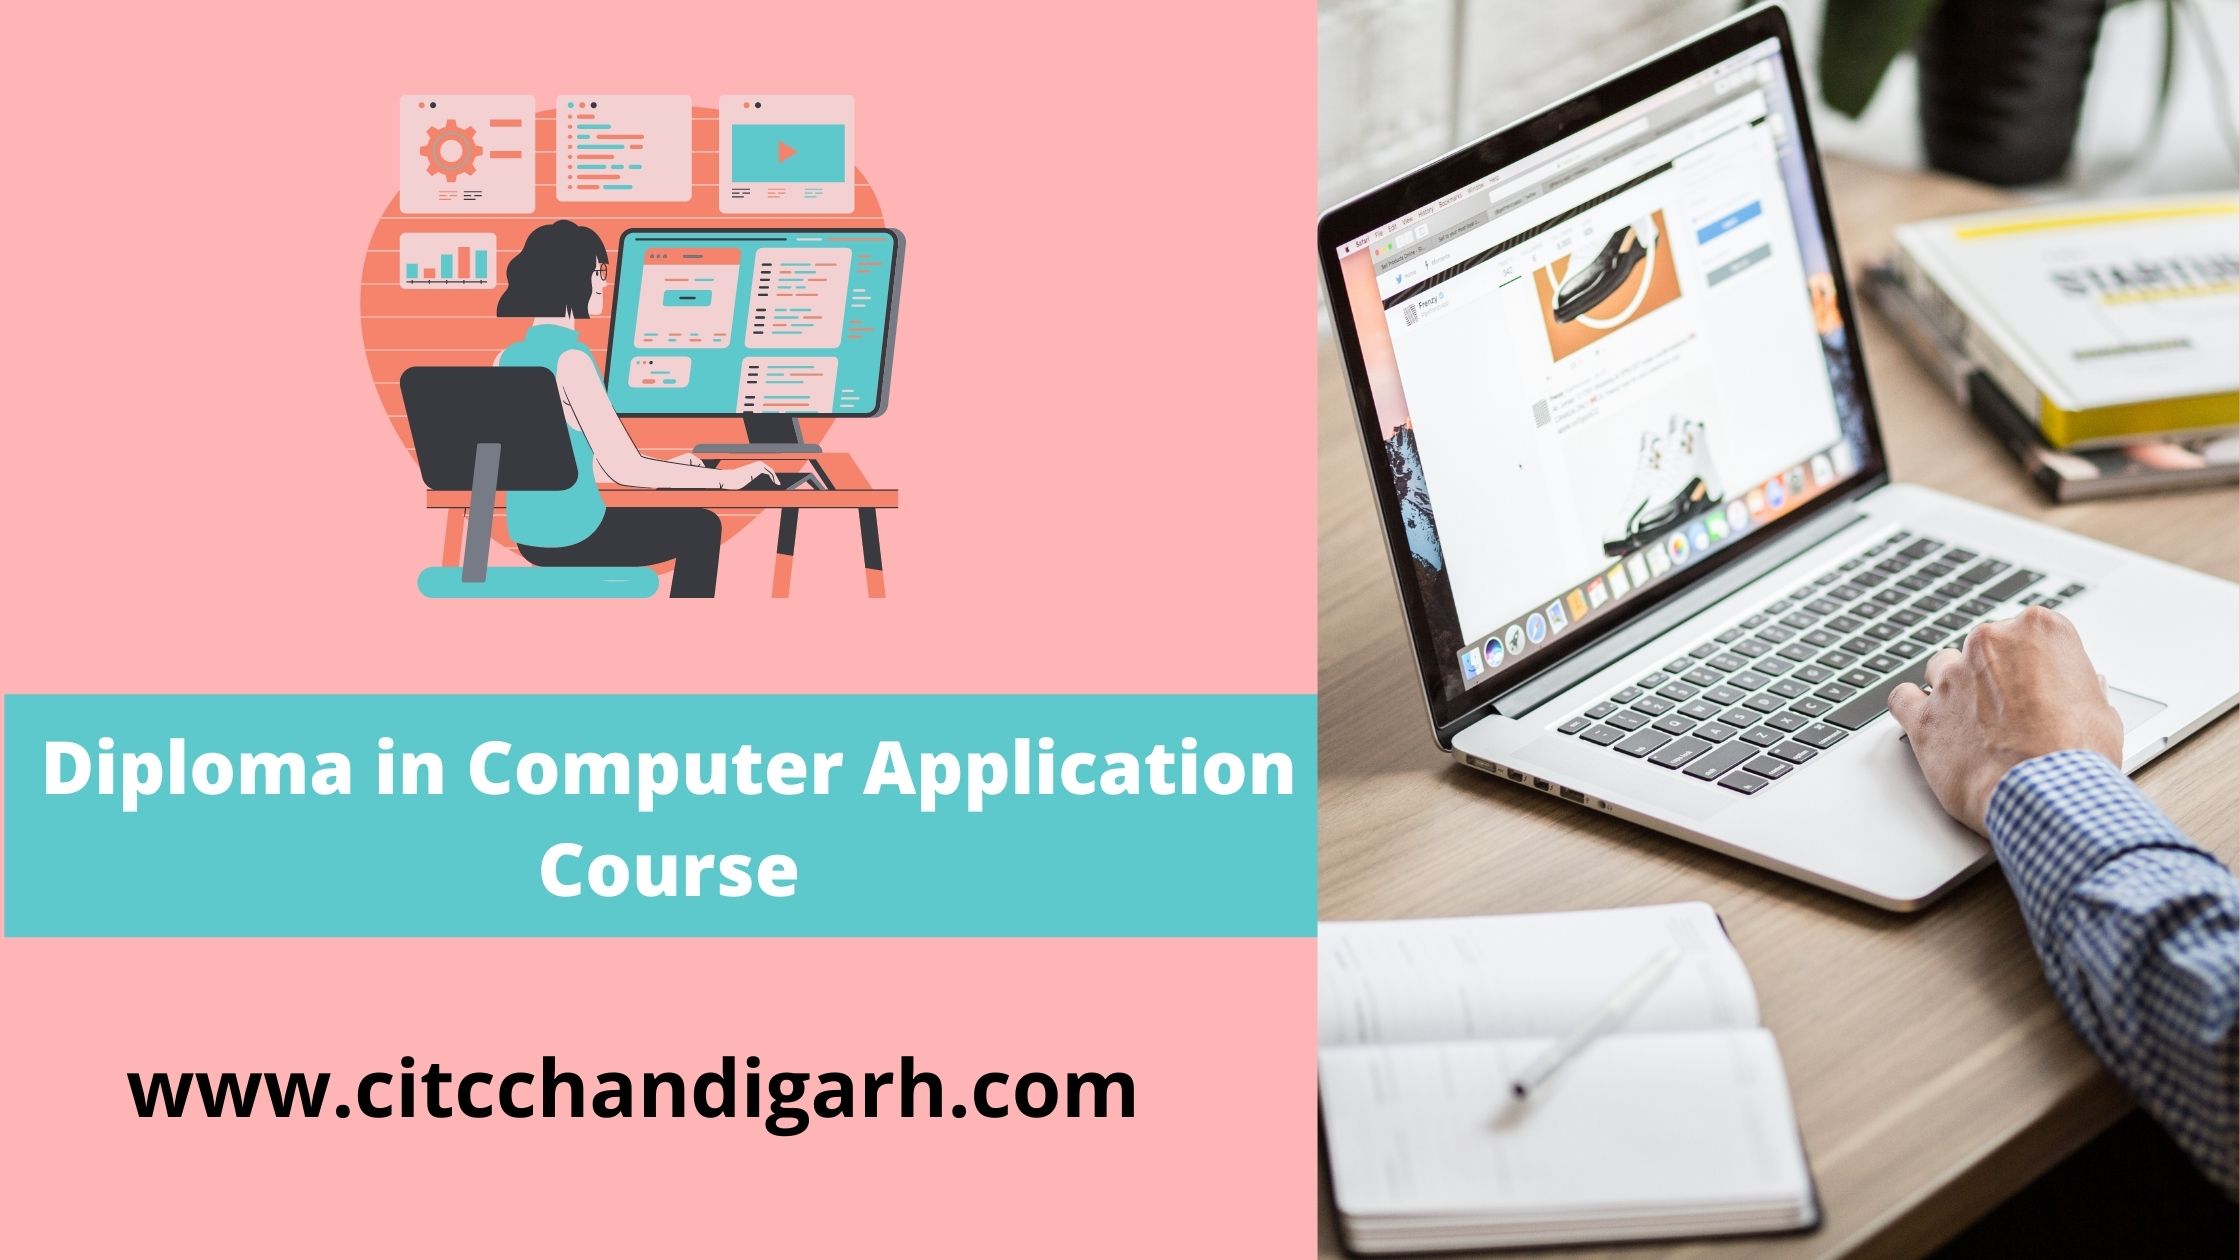 Diploma in Computer Application Course | CITC Chandigarh